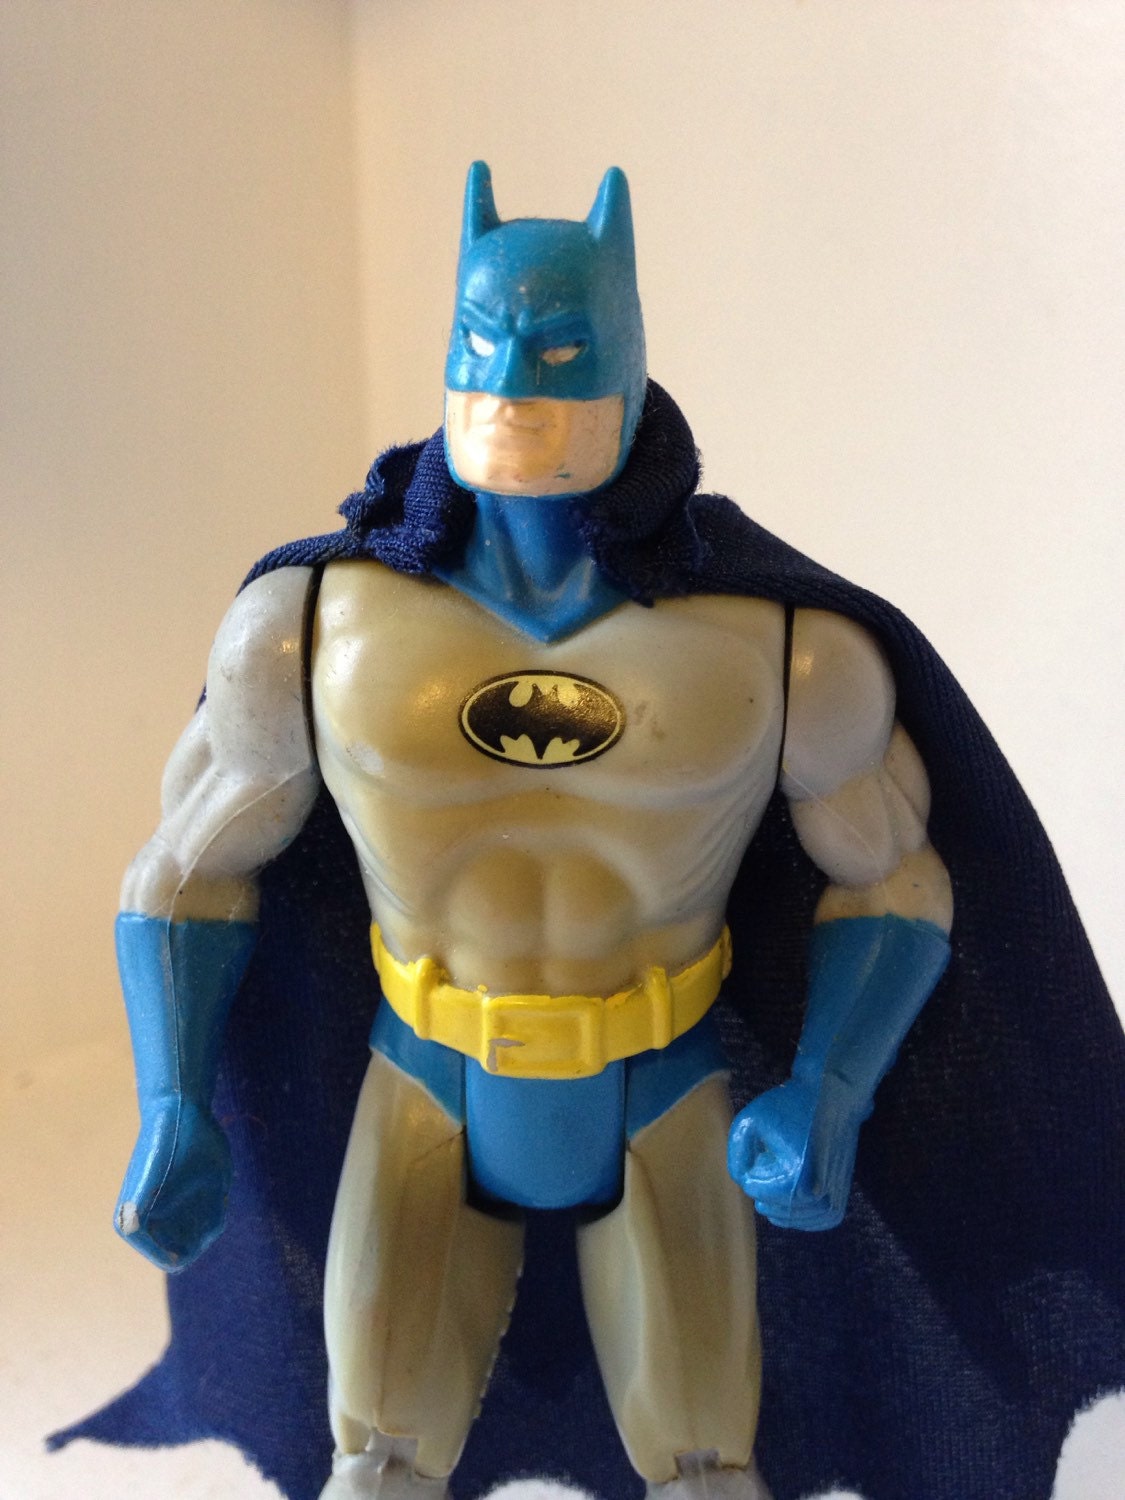 Batman Kenner Super Powers Vintage Action Figure by MikesVintage - Il Fullxfull.698832150 231x